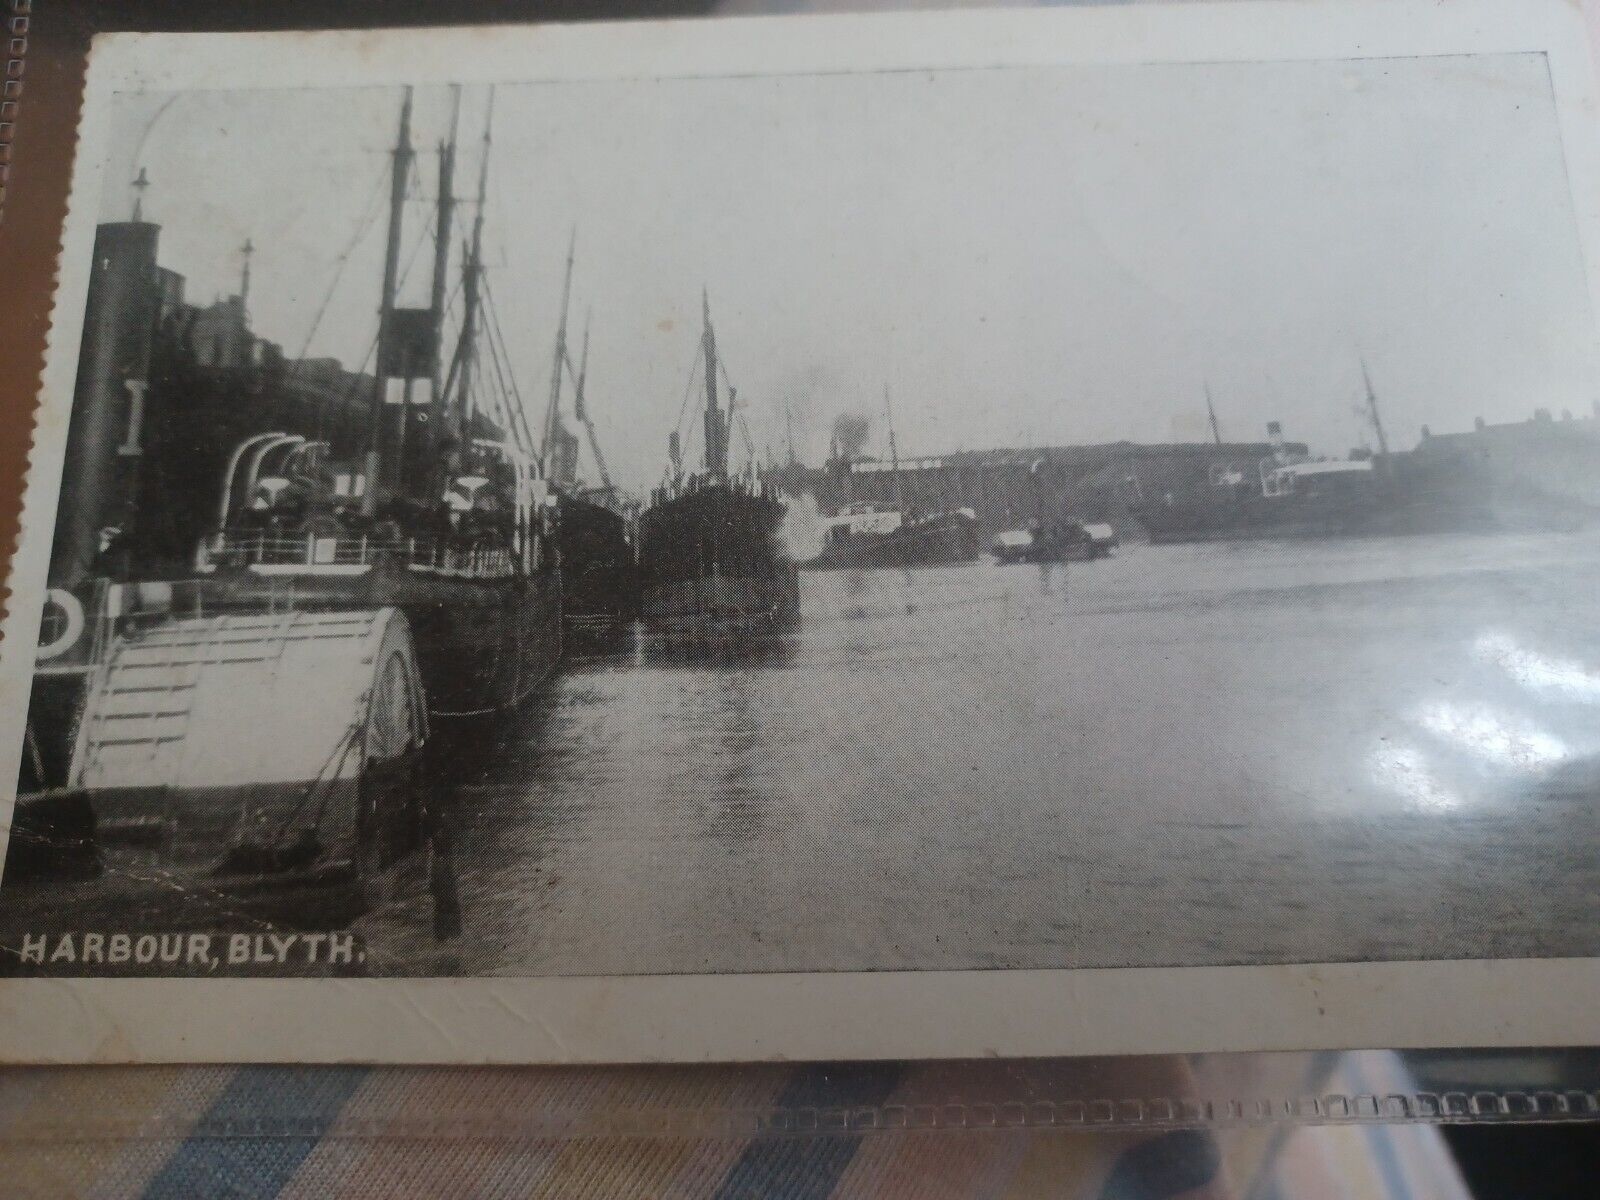 House Clearance -  Vintage Service Blyth Harbour.  Post dated 1904